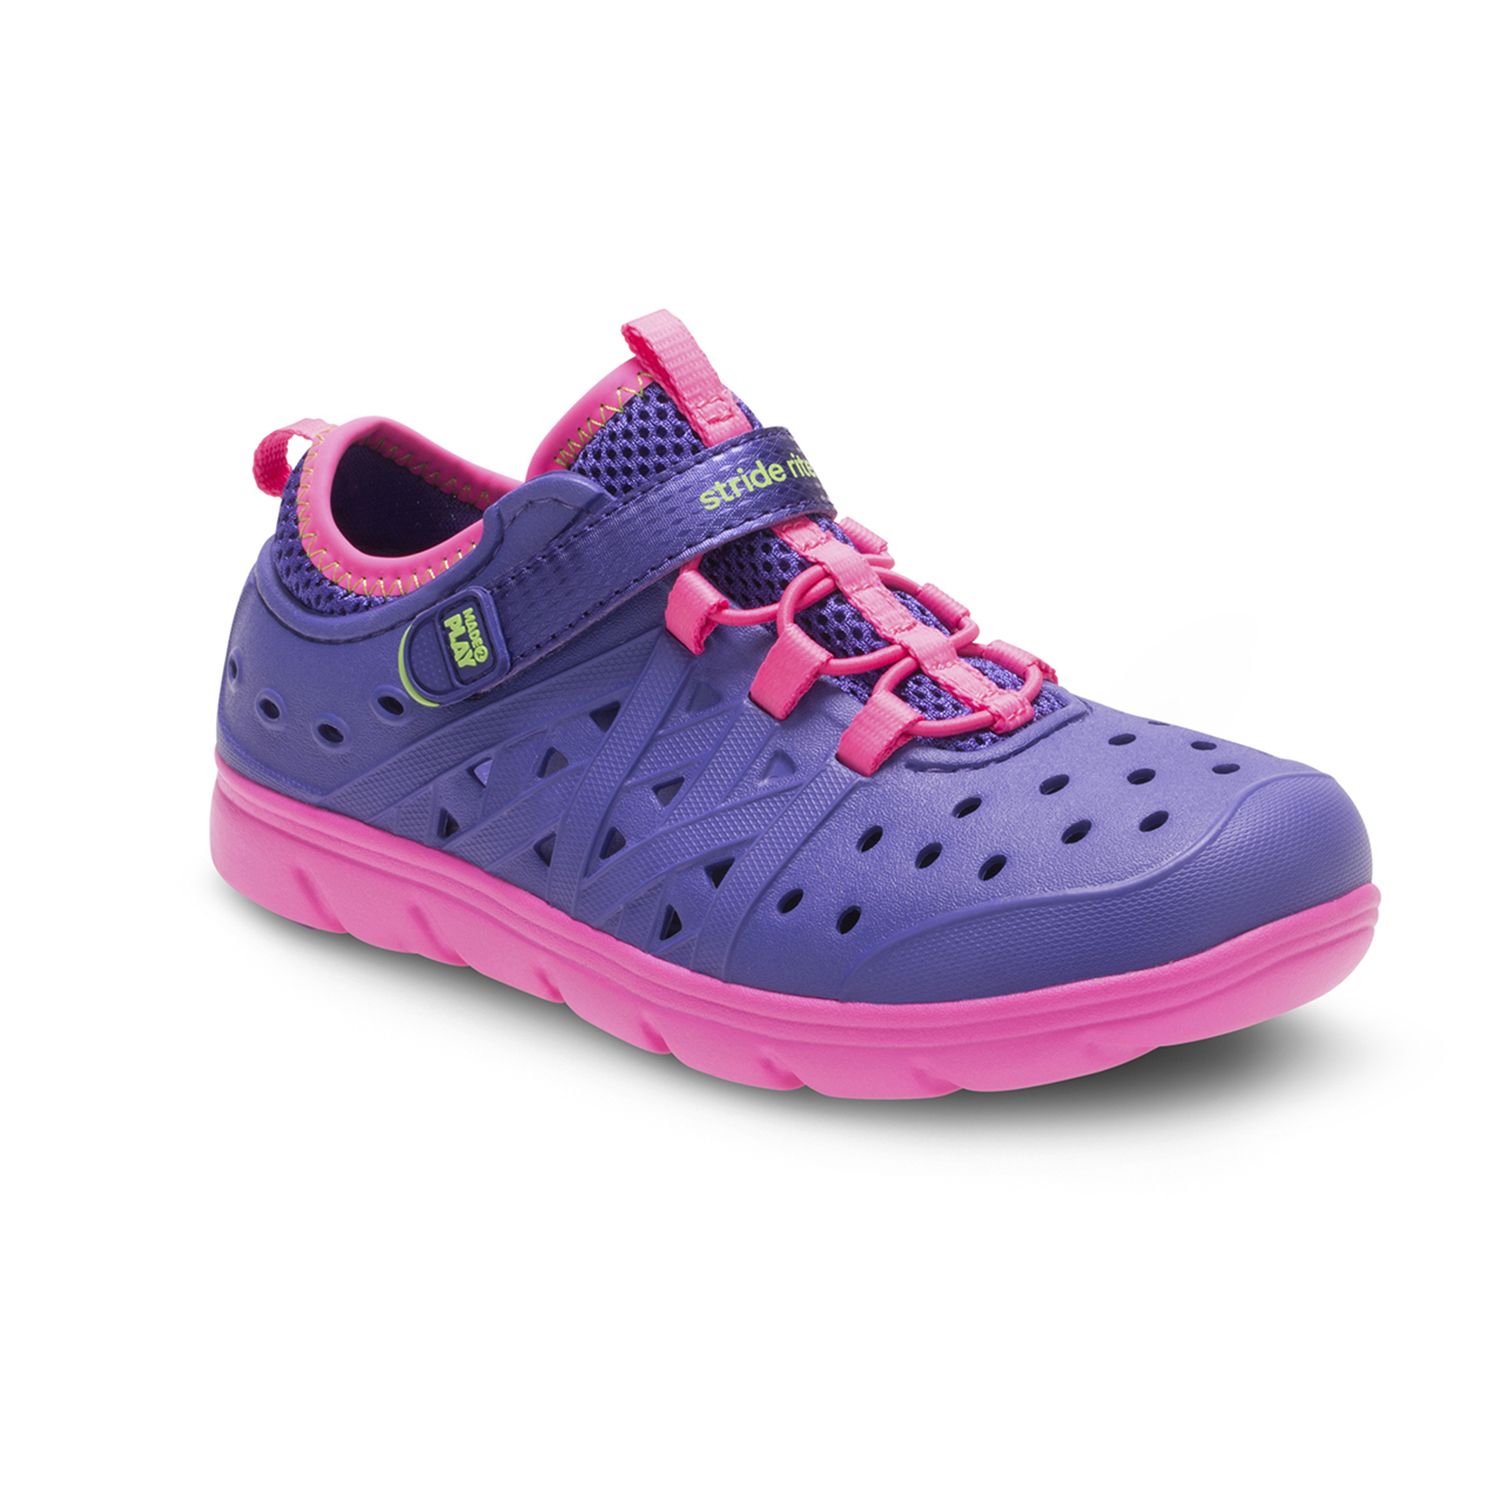 Play Phibian Girls' Water Shoes